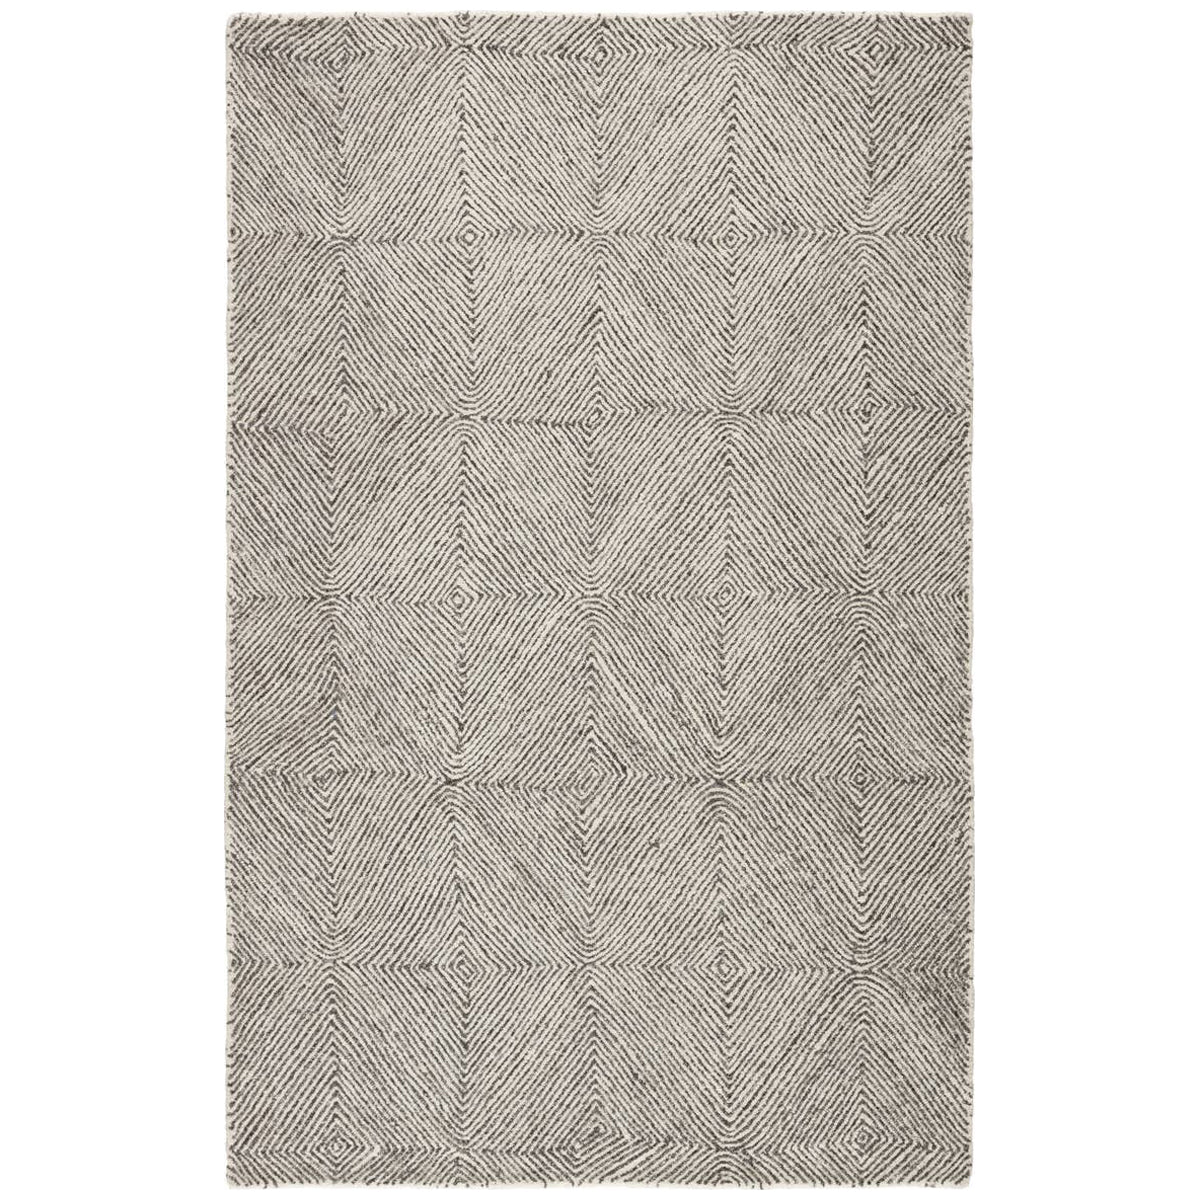 Jaipur Traditions Made Modern Exhibition MMT19 Rug